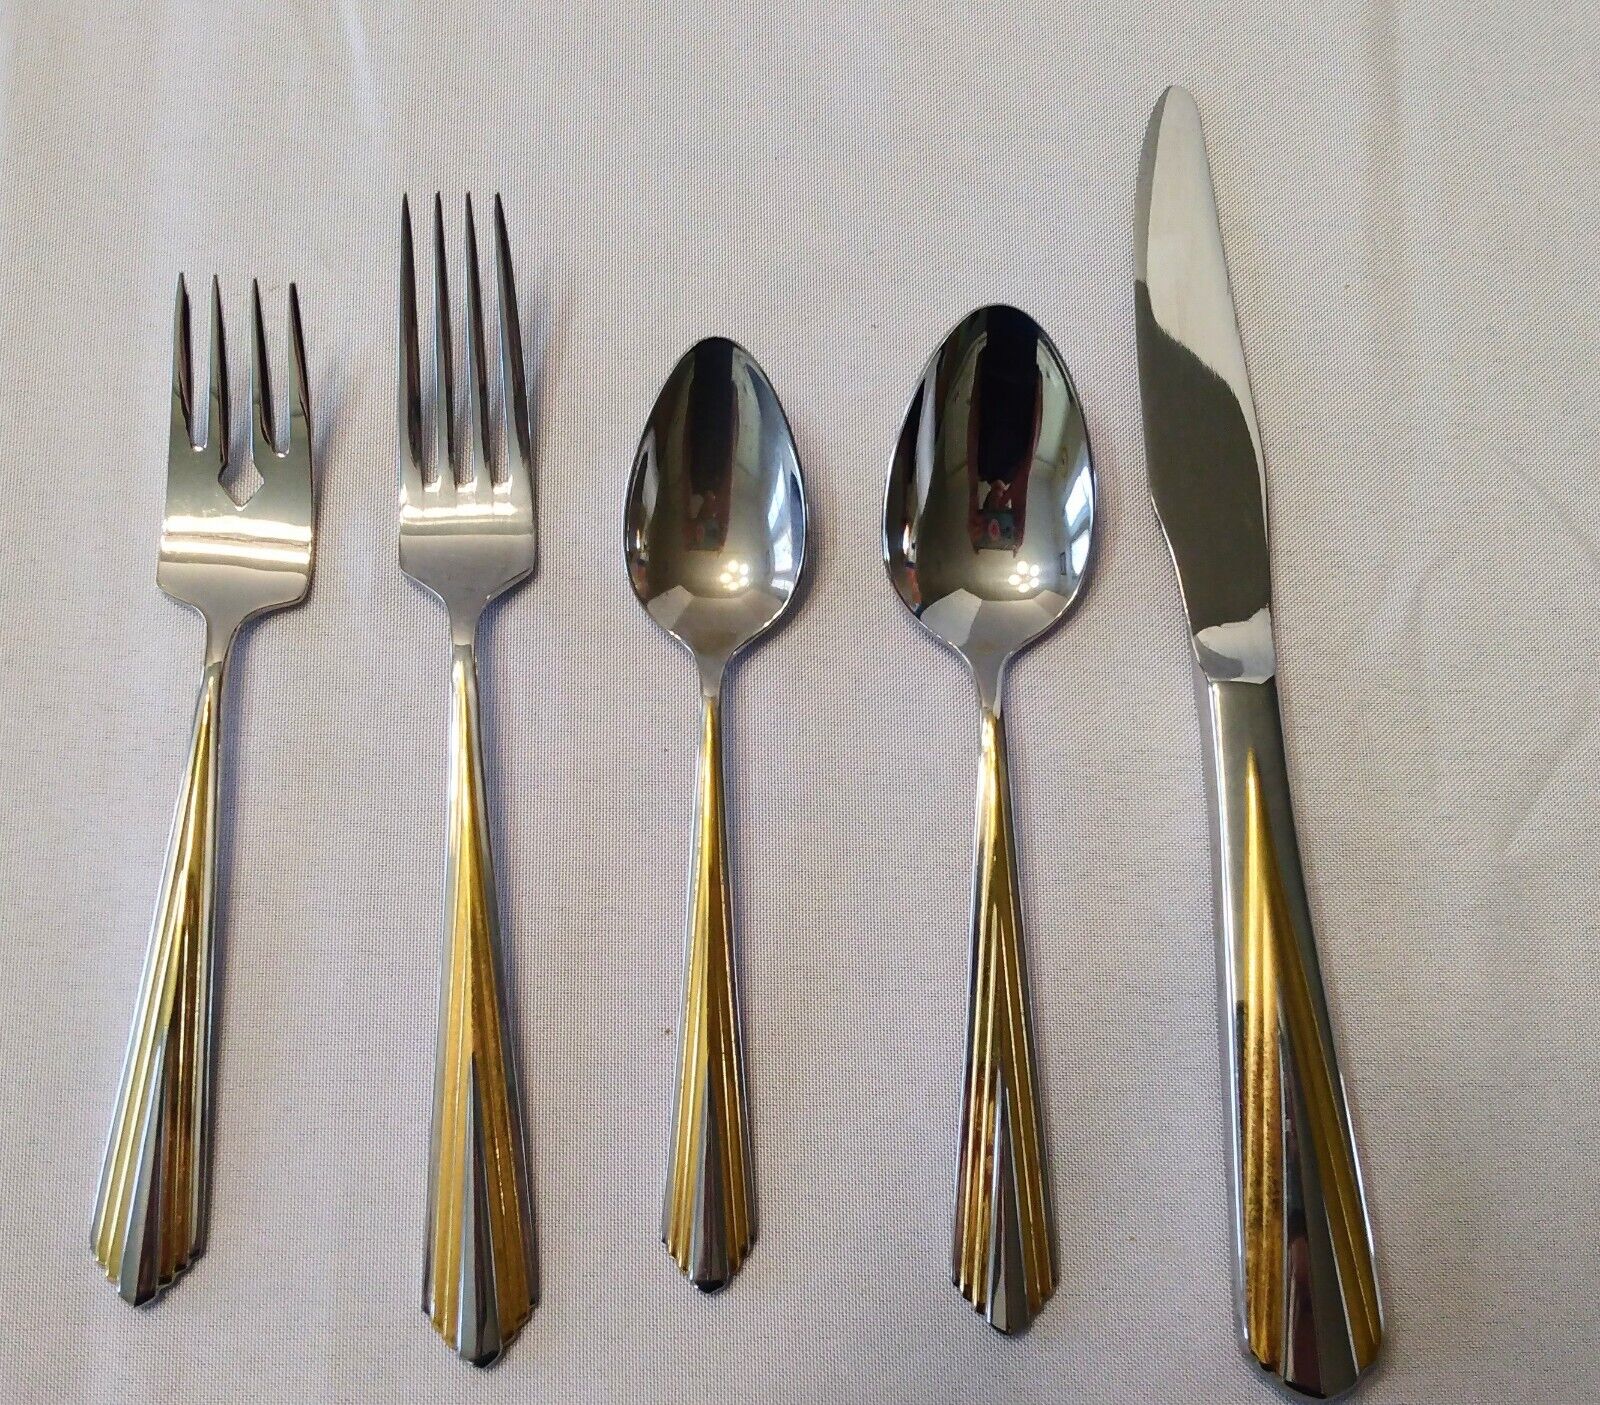 SPIRE GOLD Reed & Barton 5 Piece Place Setting NEW NEVER USED made in Korea